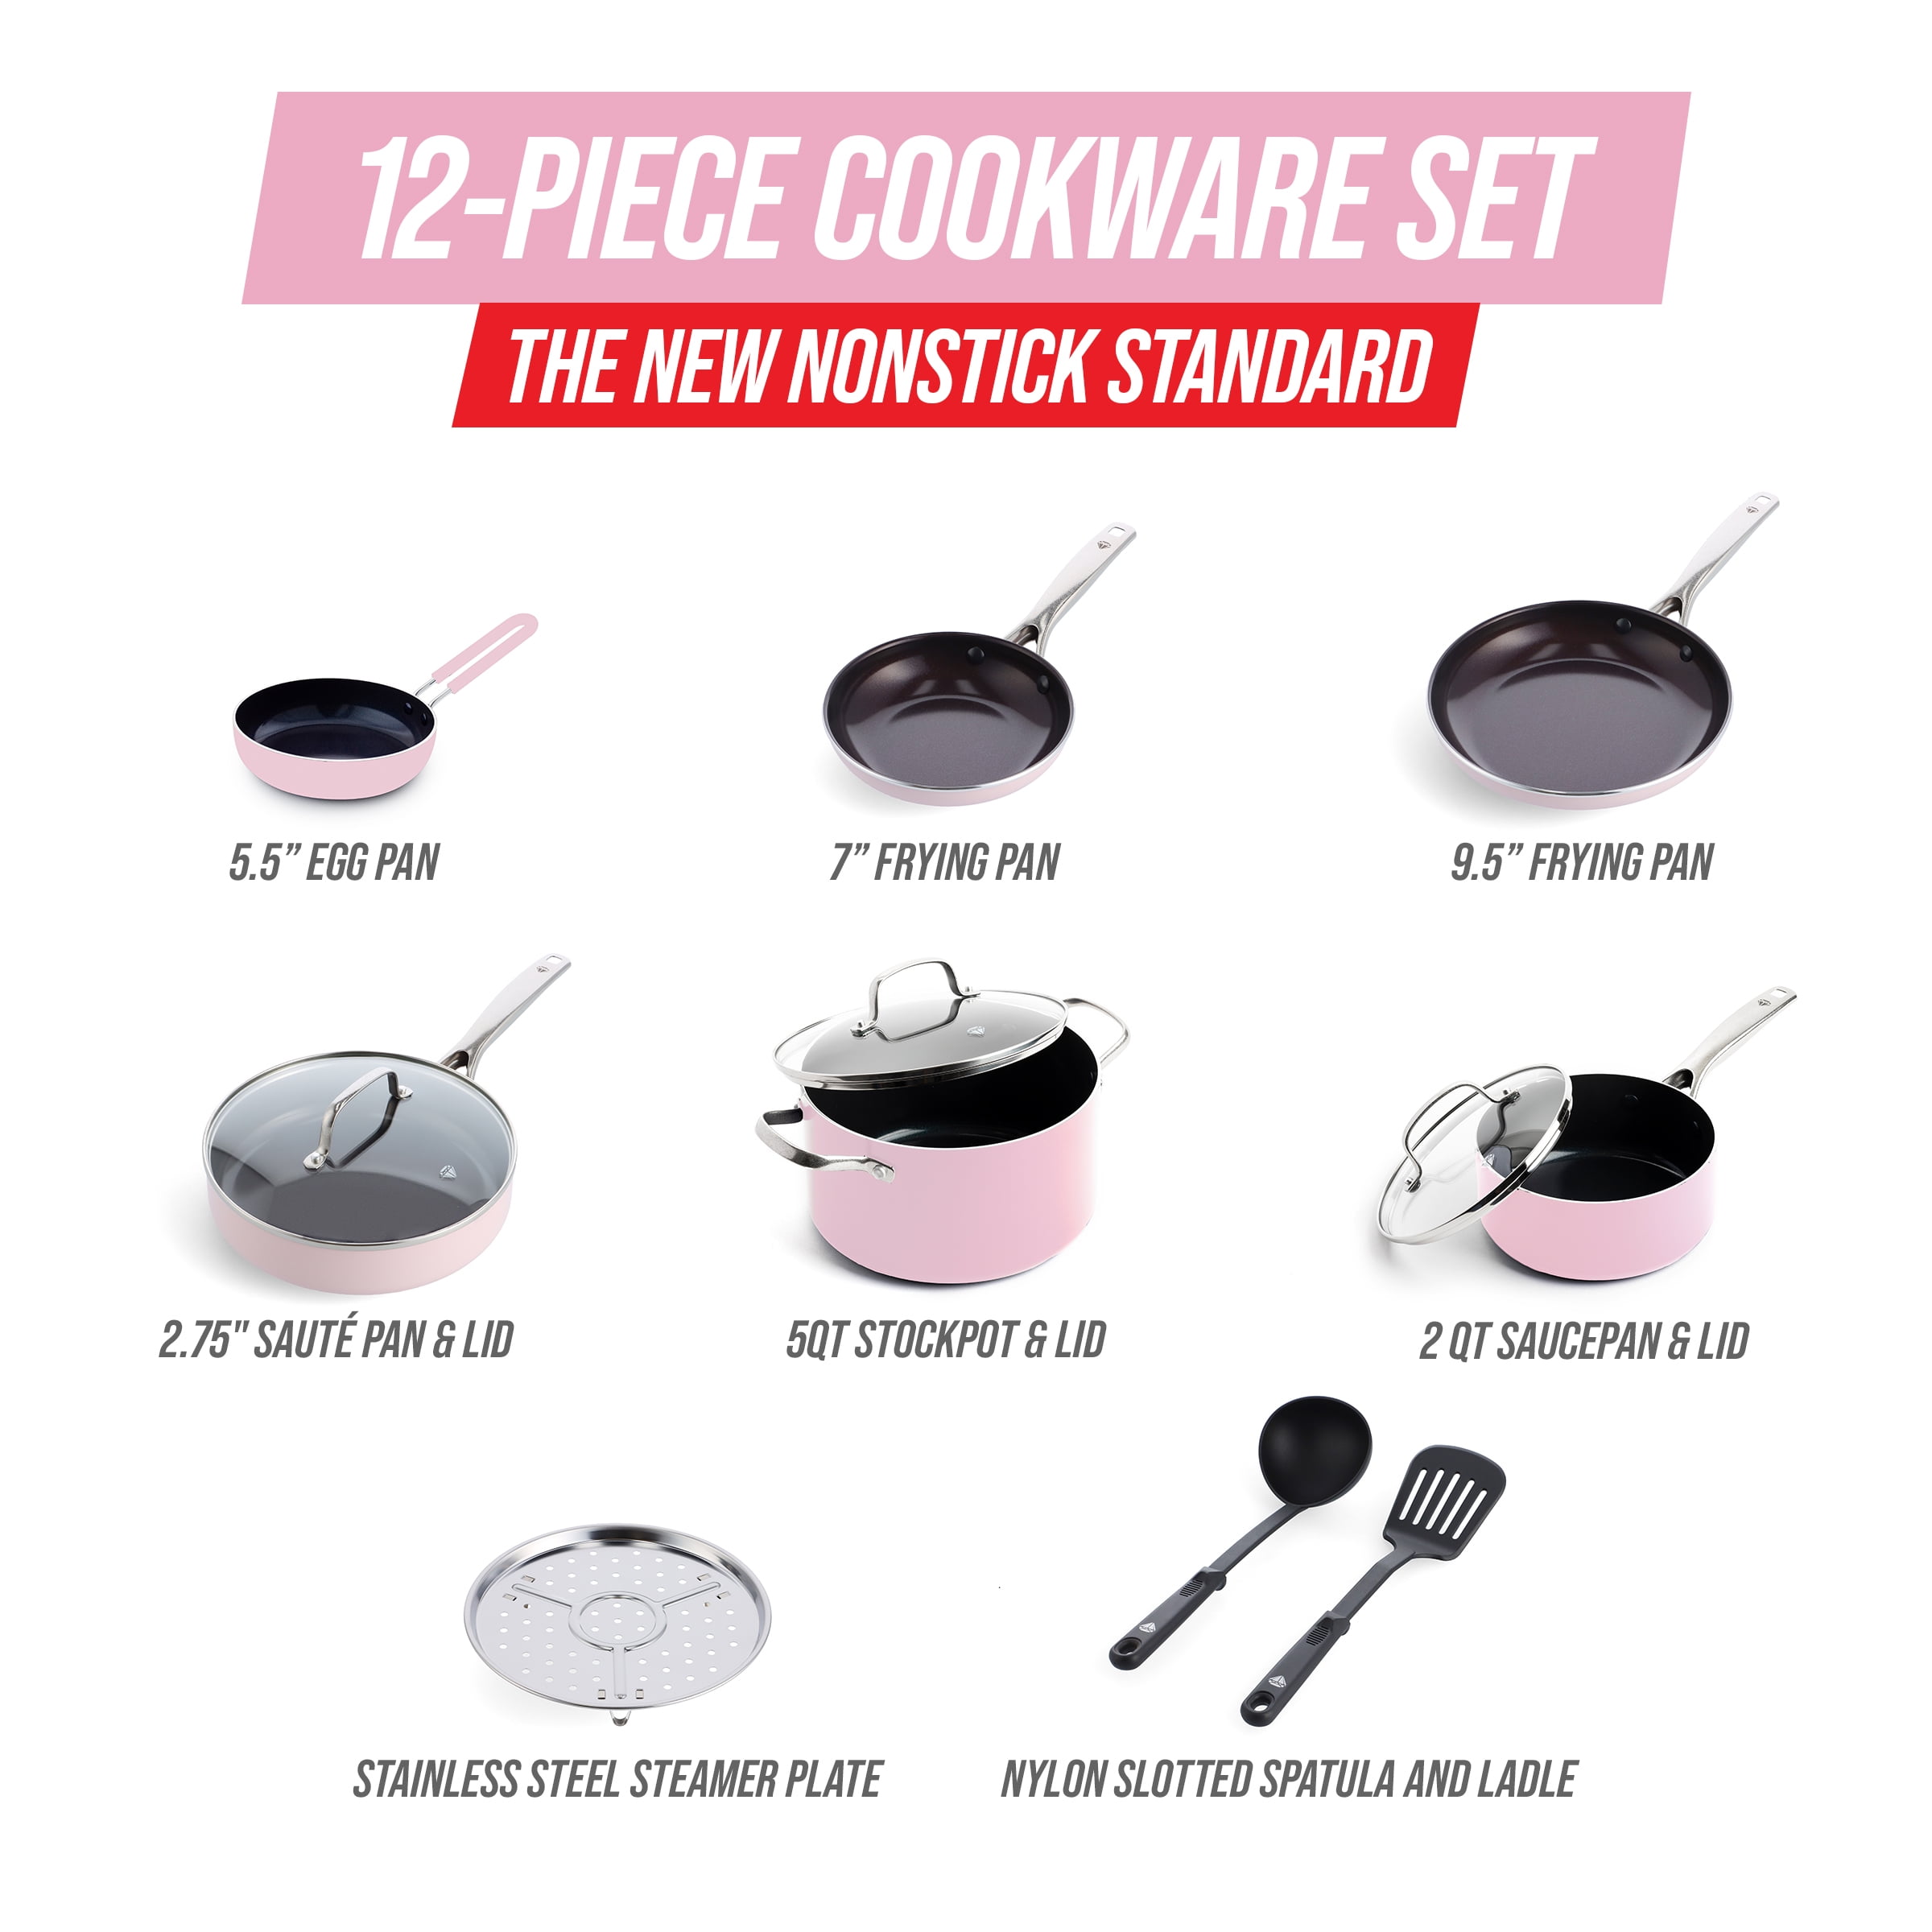 cookware in-the-pink  Cookware set, Pots and pans sets, Ceramic